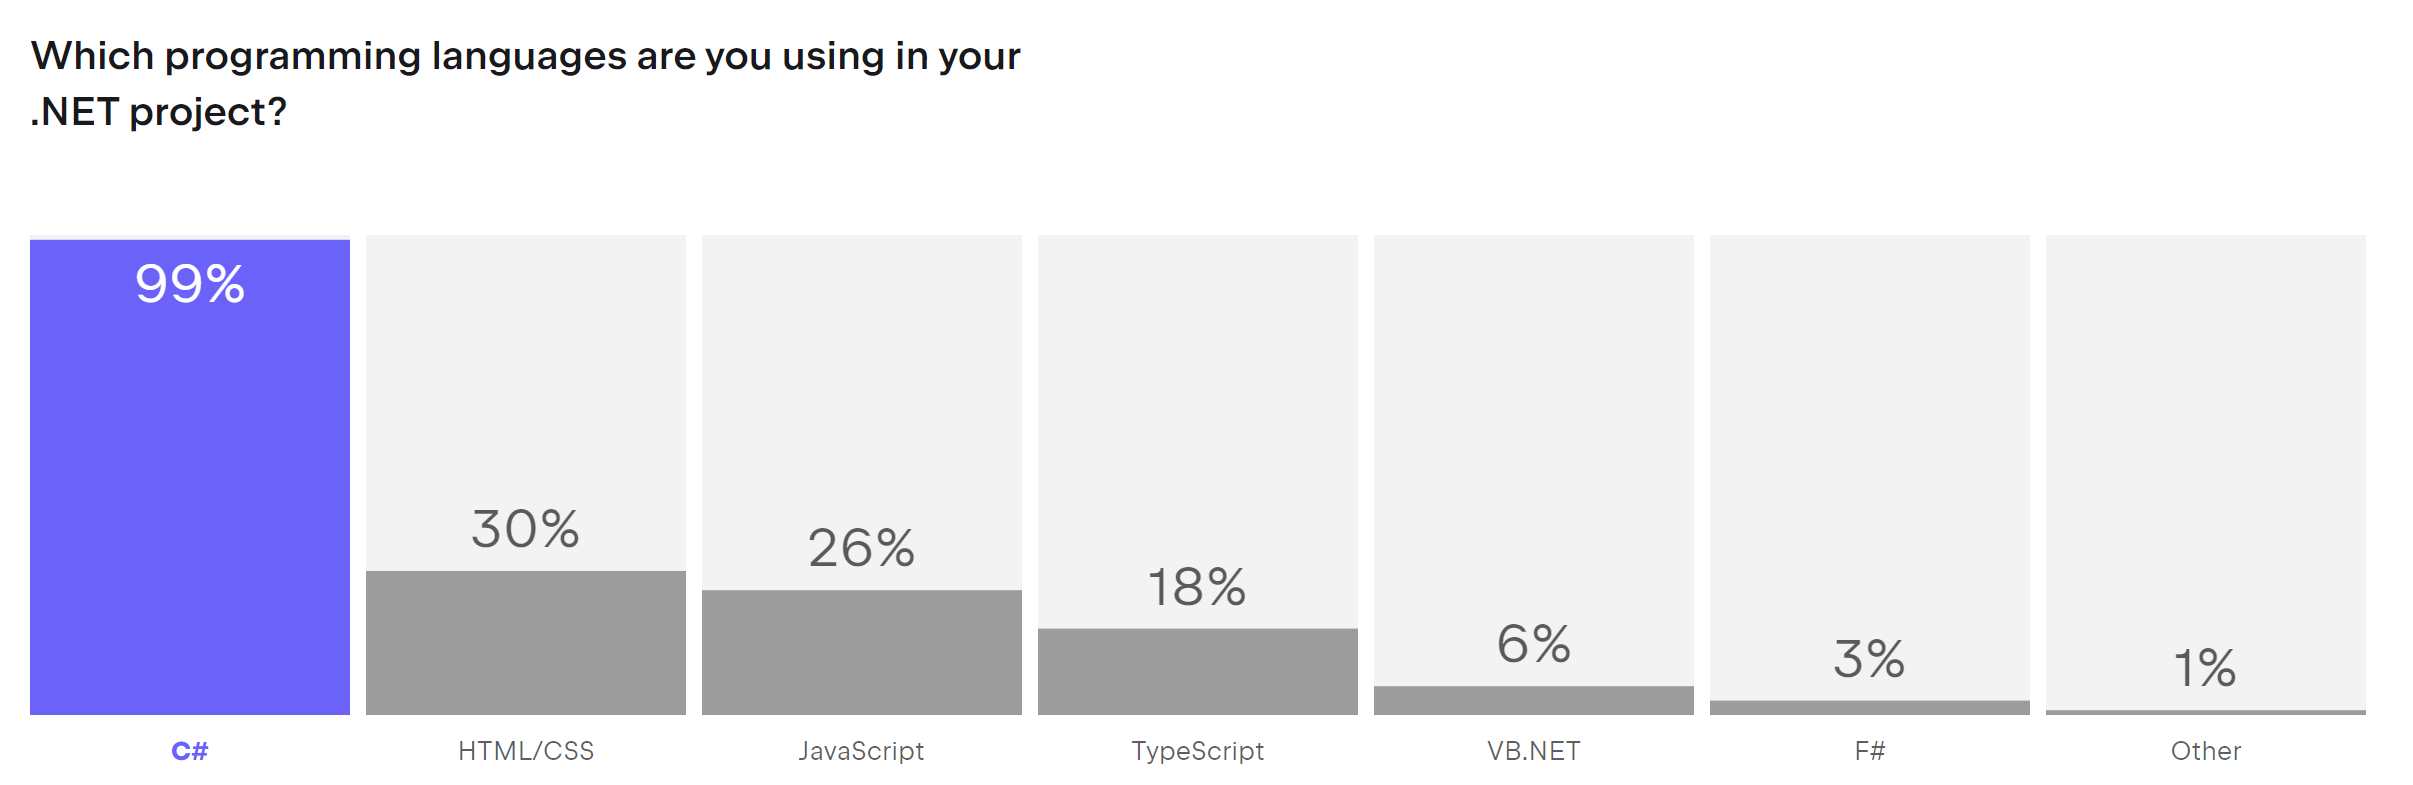 Image shows survey results to the question: Which programming languages are you using in your dotnet project
